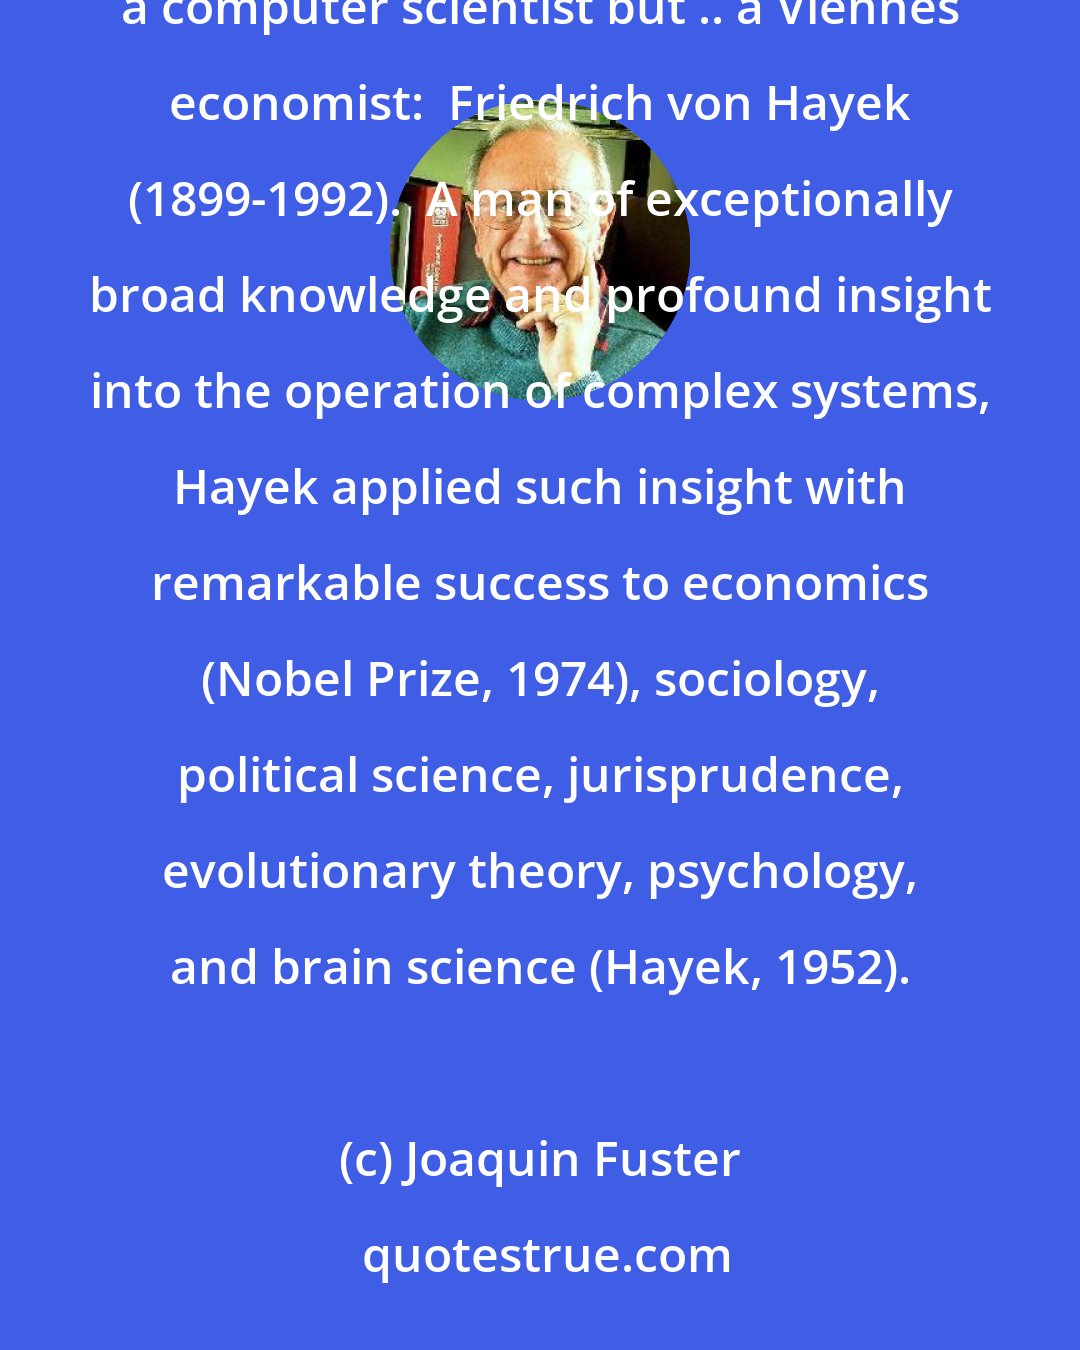 Joaquin Fuster: The first proponent of cortical memory networks on a major scale was neither a neuroscientist nor a computer scientist but .. a Viennes economist:  Friedrich von Hayek (1899-1992).  A man of exceptionally broad knowledge and profound insight into the operation of complex systems, Hayek applied such insight with remarkable success to economics (Nobel Prize, 1974), sociology, political science, jurisprudence, evolutionary theory, psychology, and brain science (Hayek, 1952).